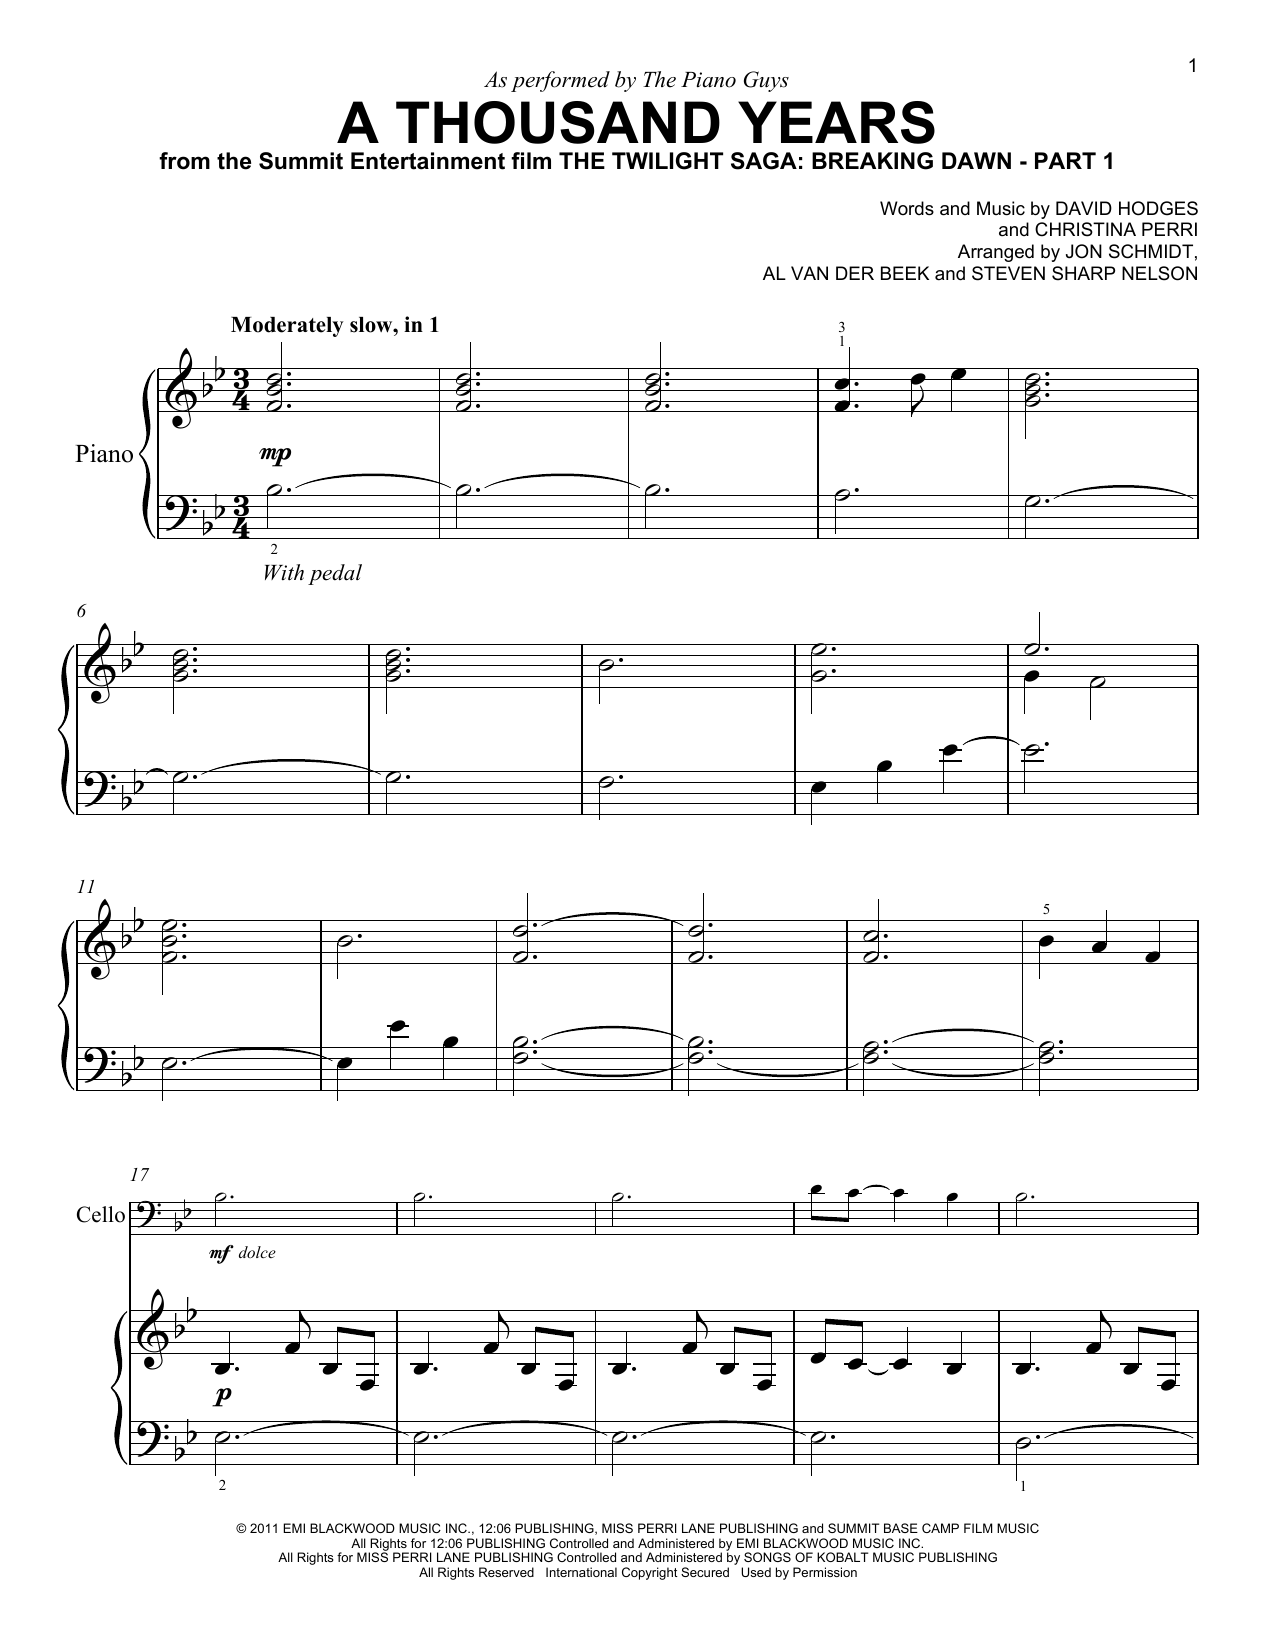 Download The Piano Guys A Thousand Years Sheet Music